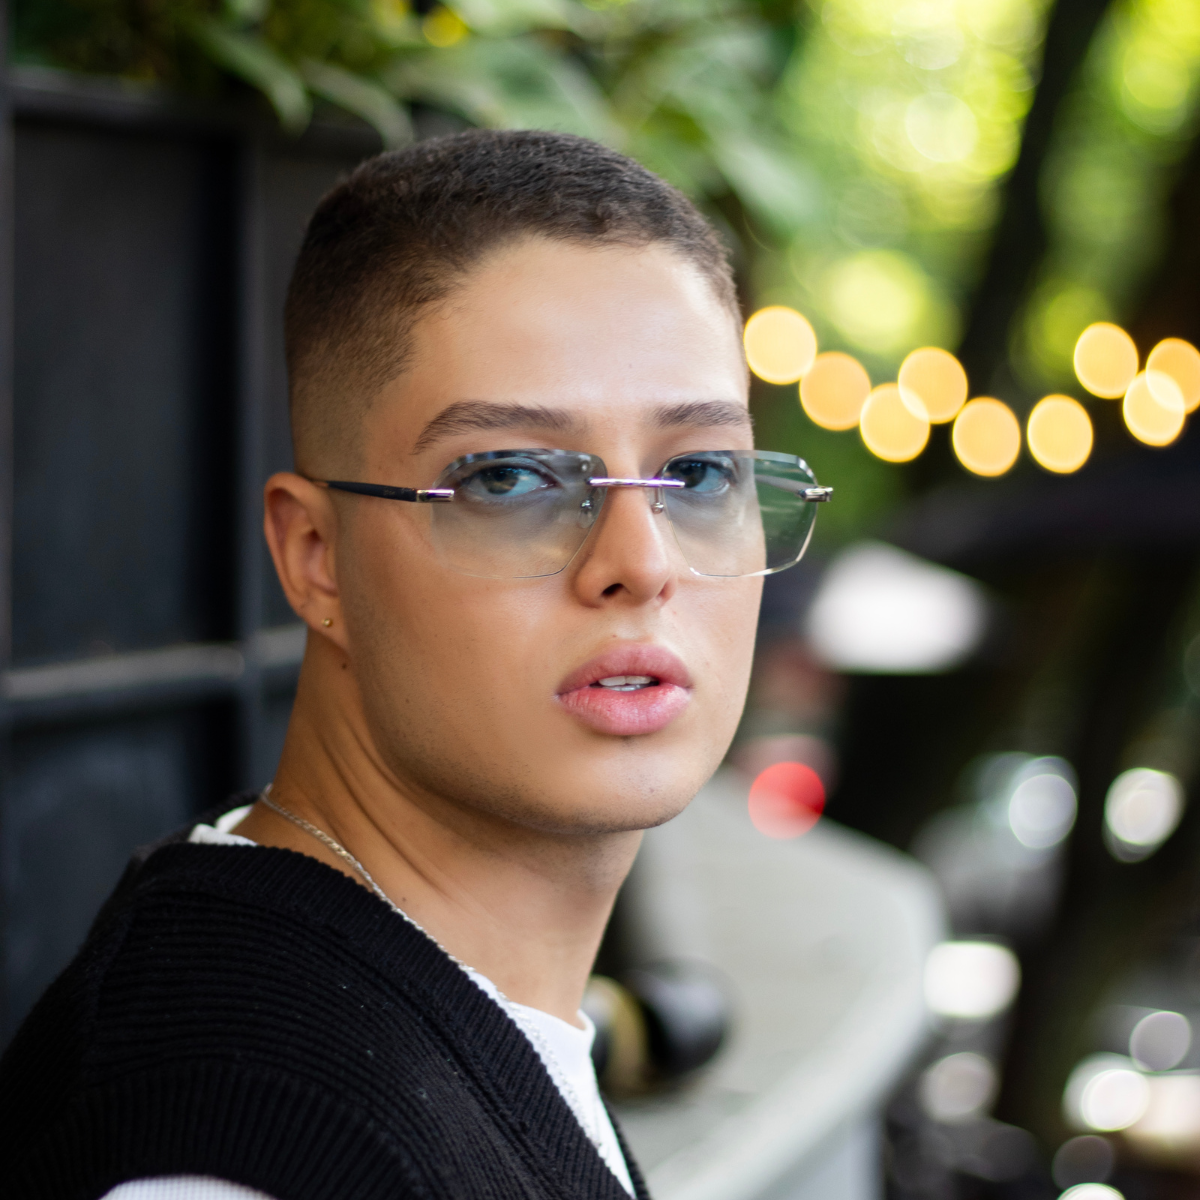 A close-up of a model wearing 'Sancy' rimless sunglasses with sky blue lenses. The rimless design complements the model's modern style against a blurred natural background, accentuated by warm bokeh lights that highlight the eyewear's elegant and contemporary aesthetic